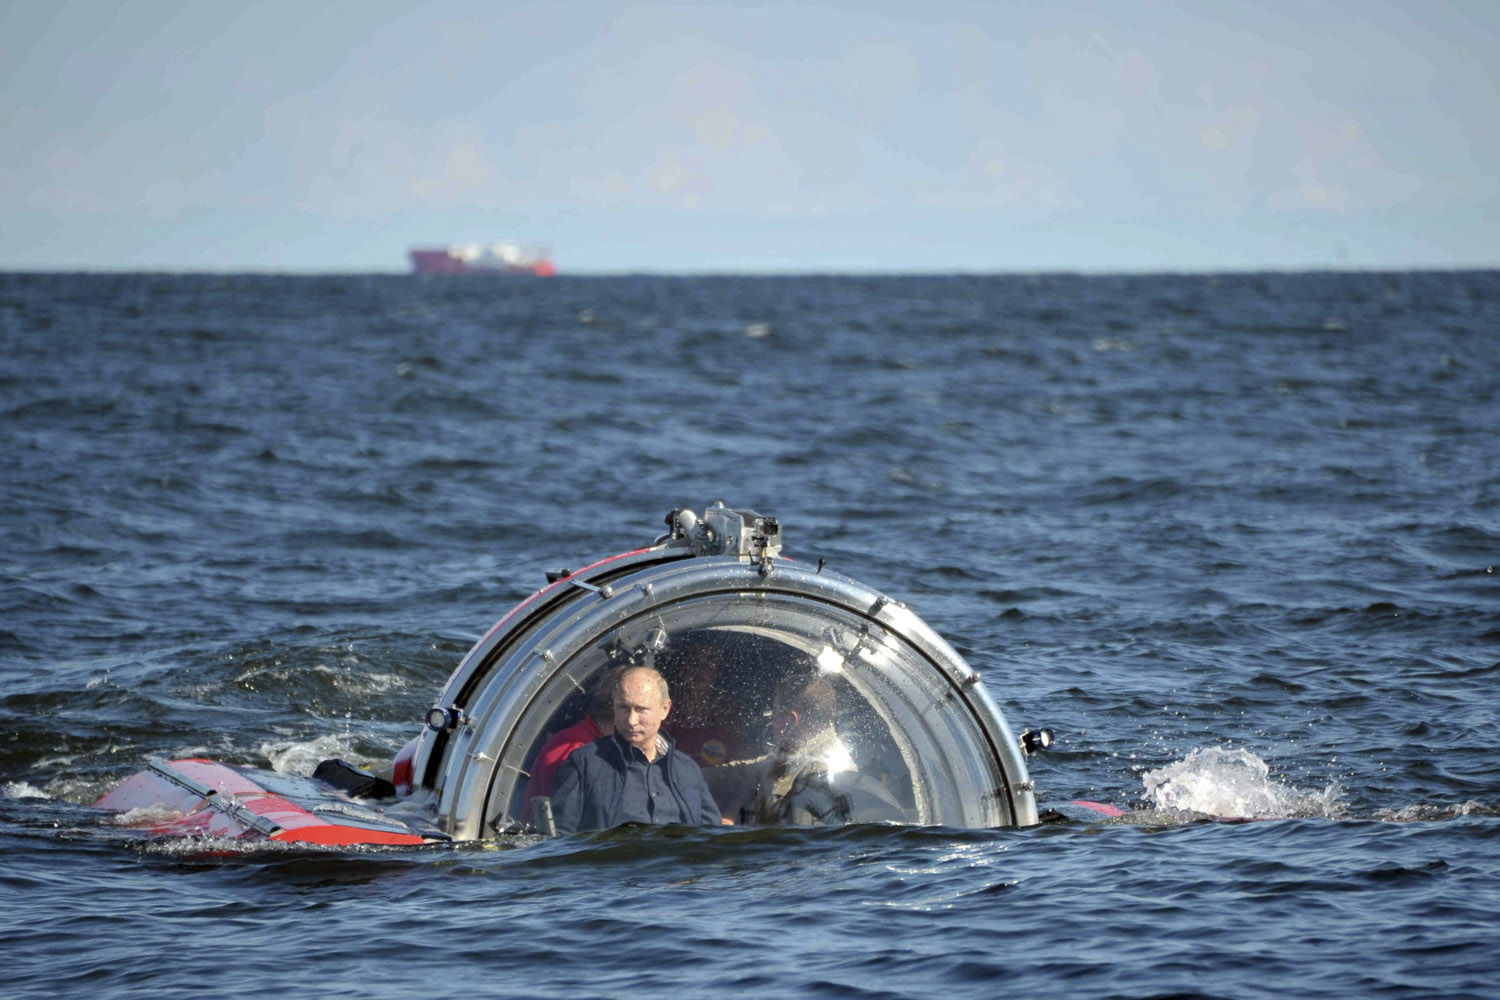 July 15, 2013. Russia's President Vladimir Putin (L) is seen through the glass of C-Explorer 5 submersible after a dive to see the remains of the naval frigate  Oleg , which sank in the 19th century, in the Gulf of Finland in the Baltic Sea.